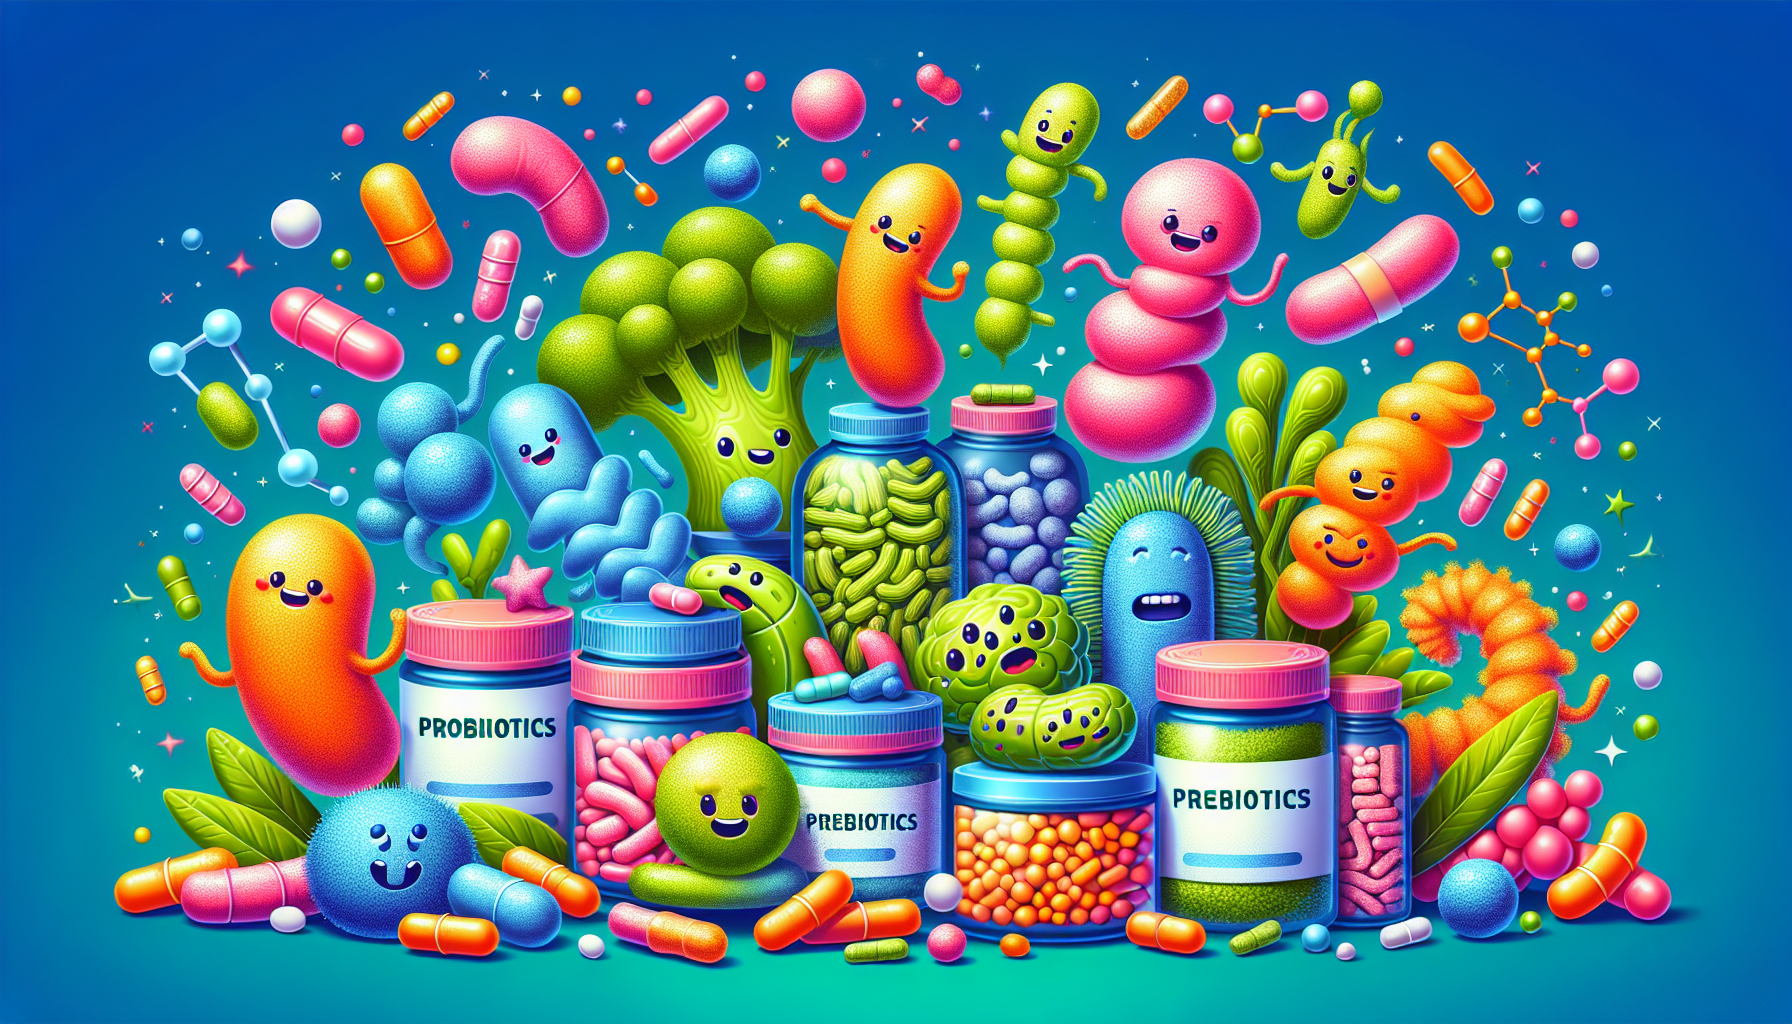 Illustration of various dietary supplements for gut health